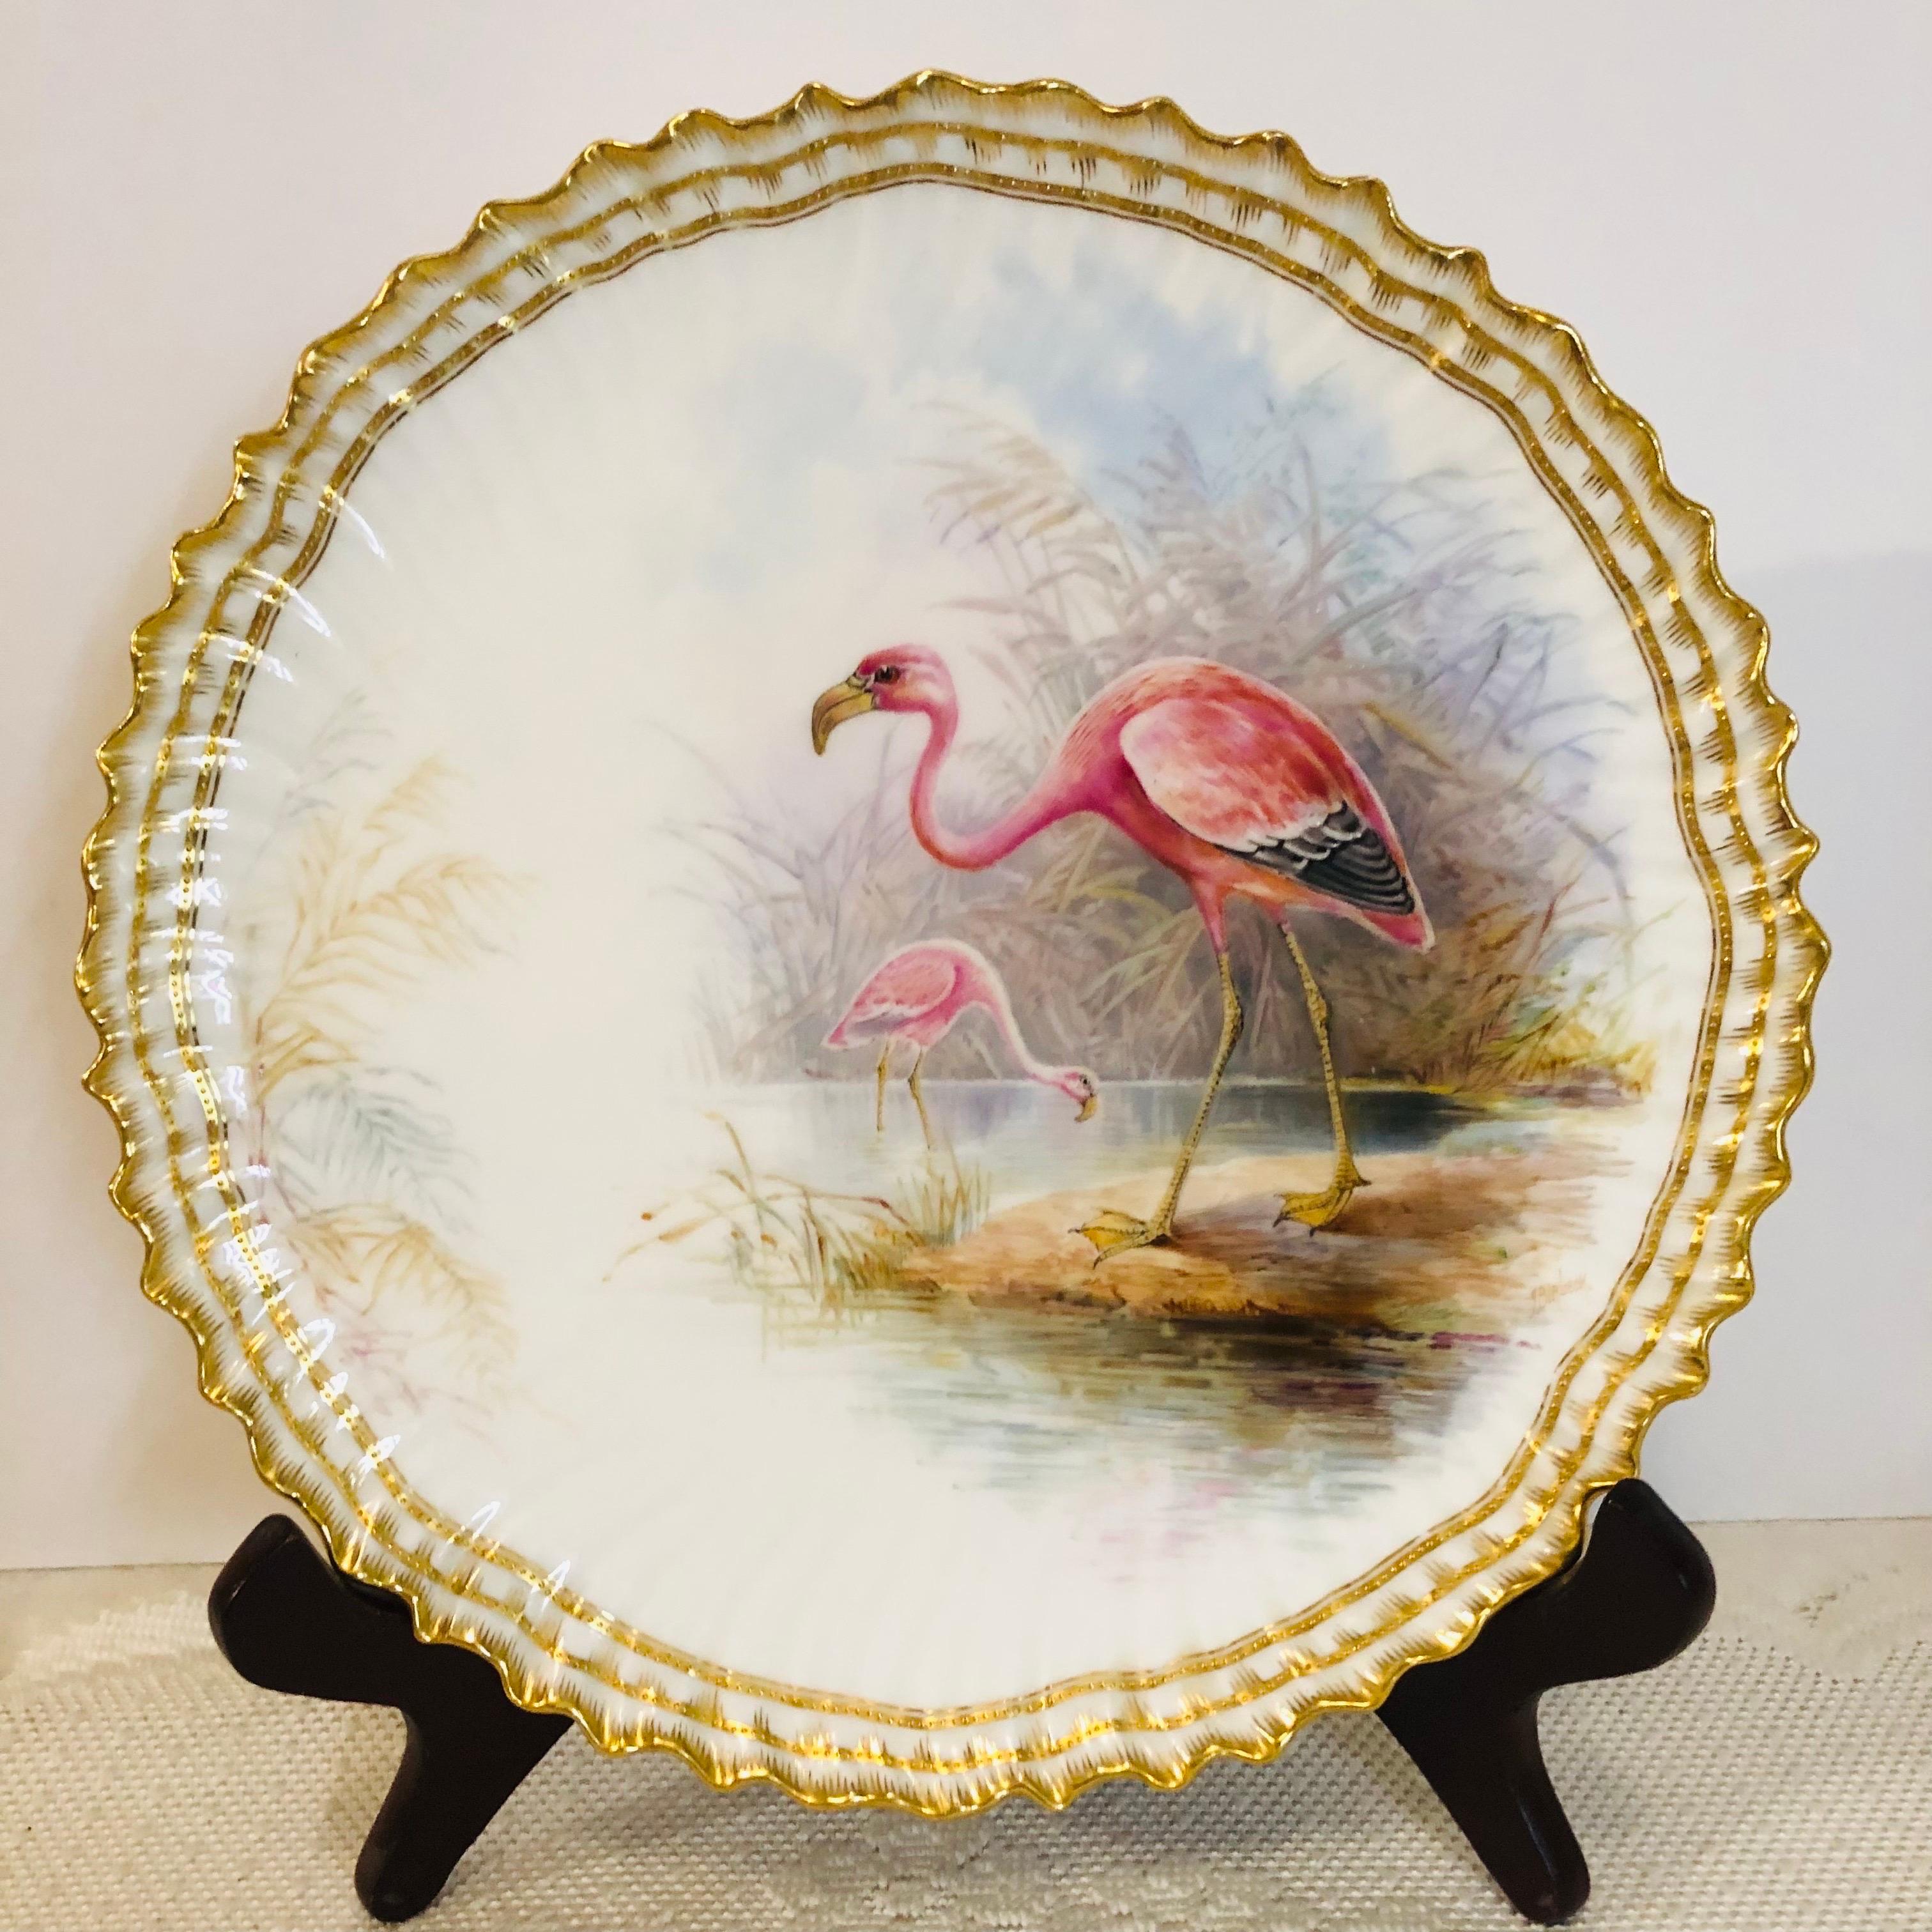 Set of 11 Cauldon Plates Each Painted Exquisitely With a Different Bird  4